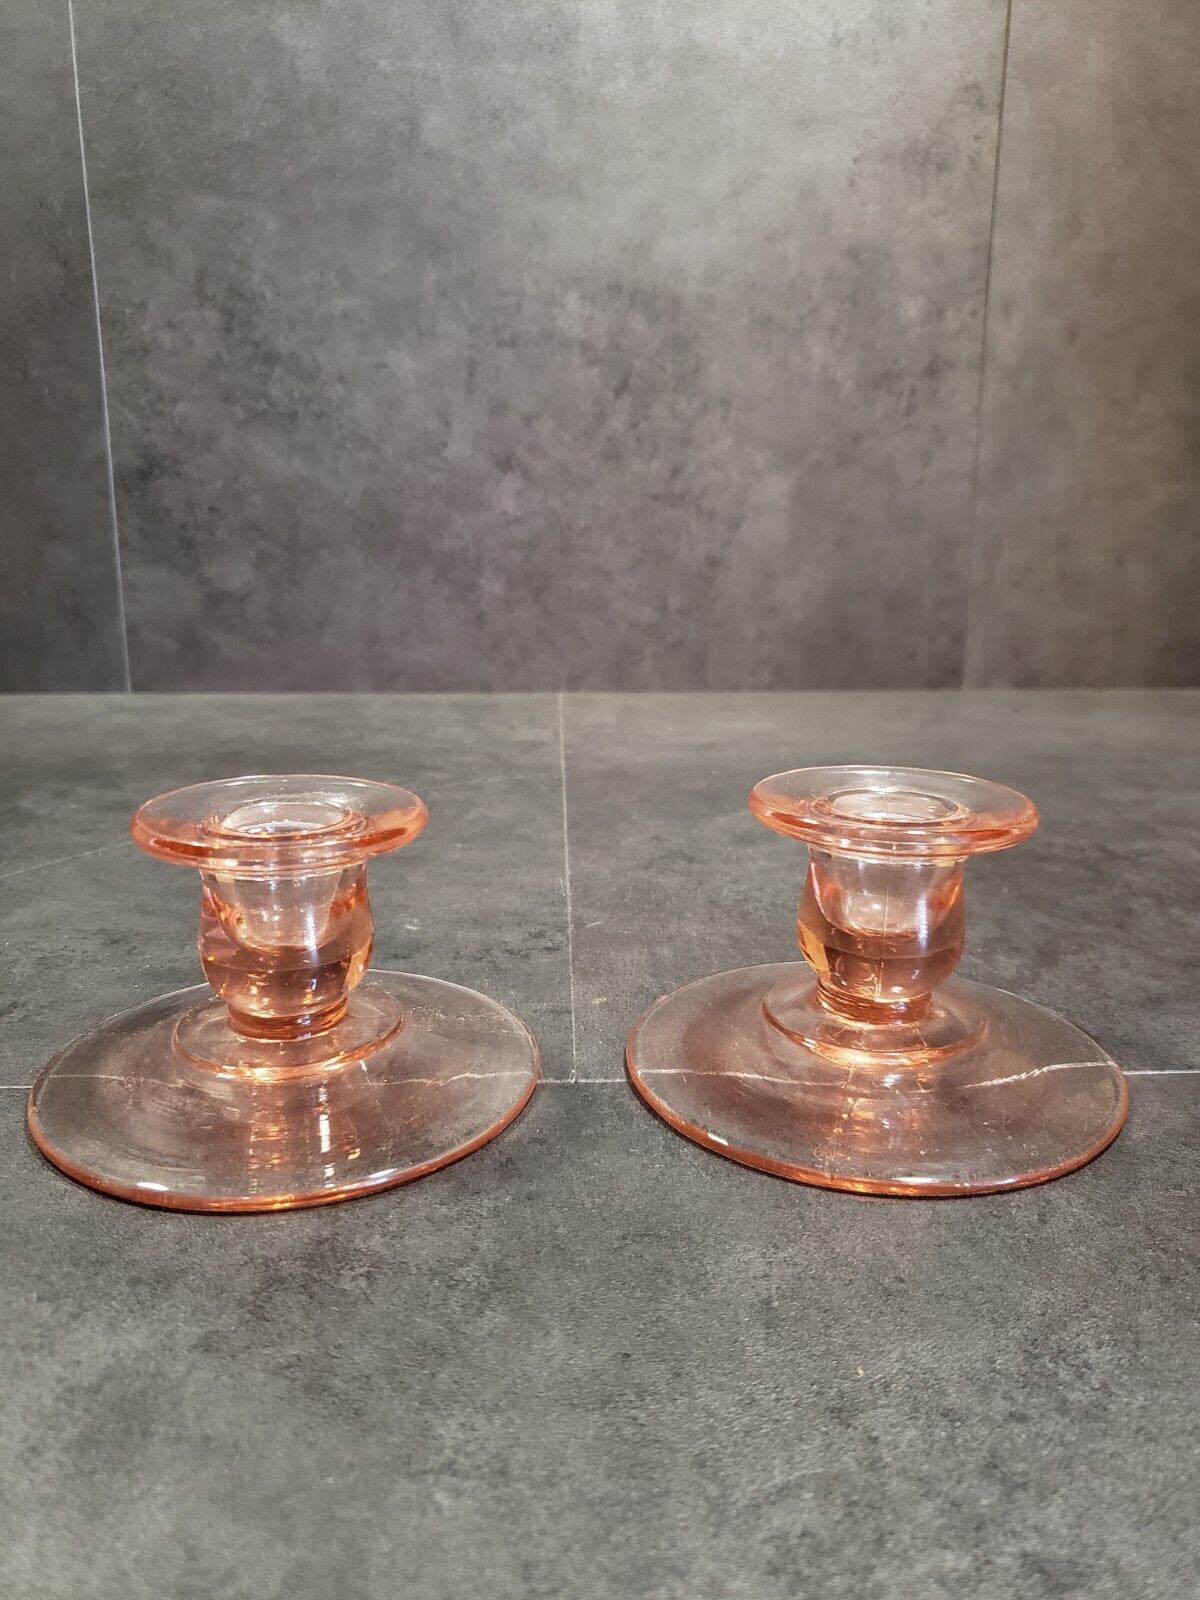 Pair of Pink Federal Depression Glass Candle Holders